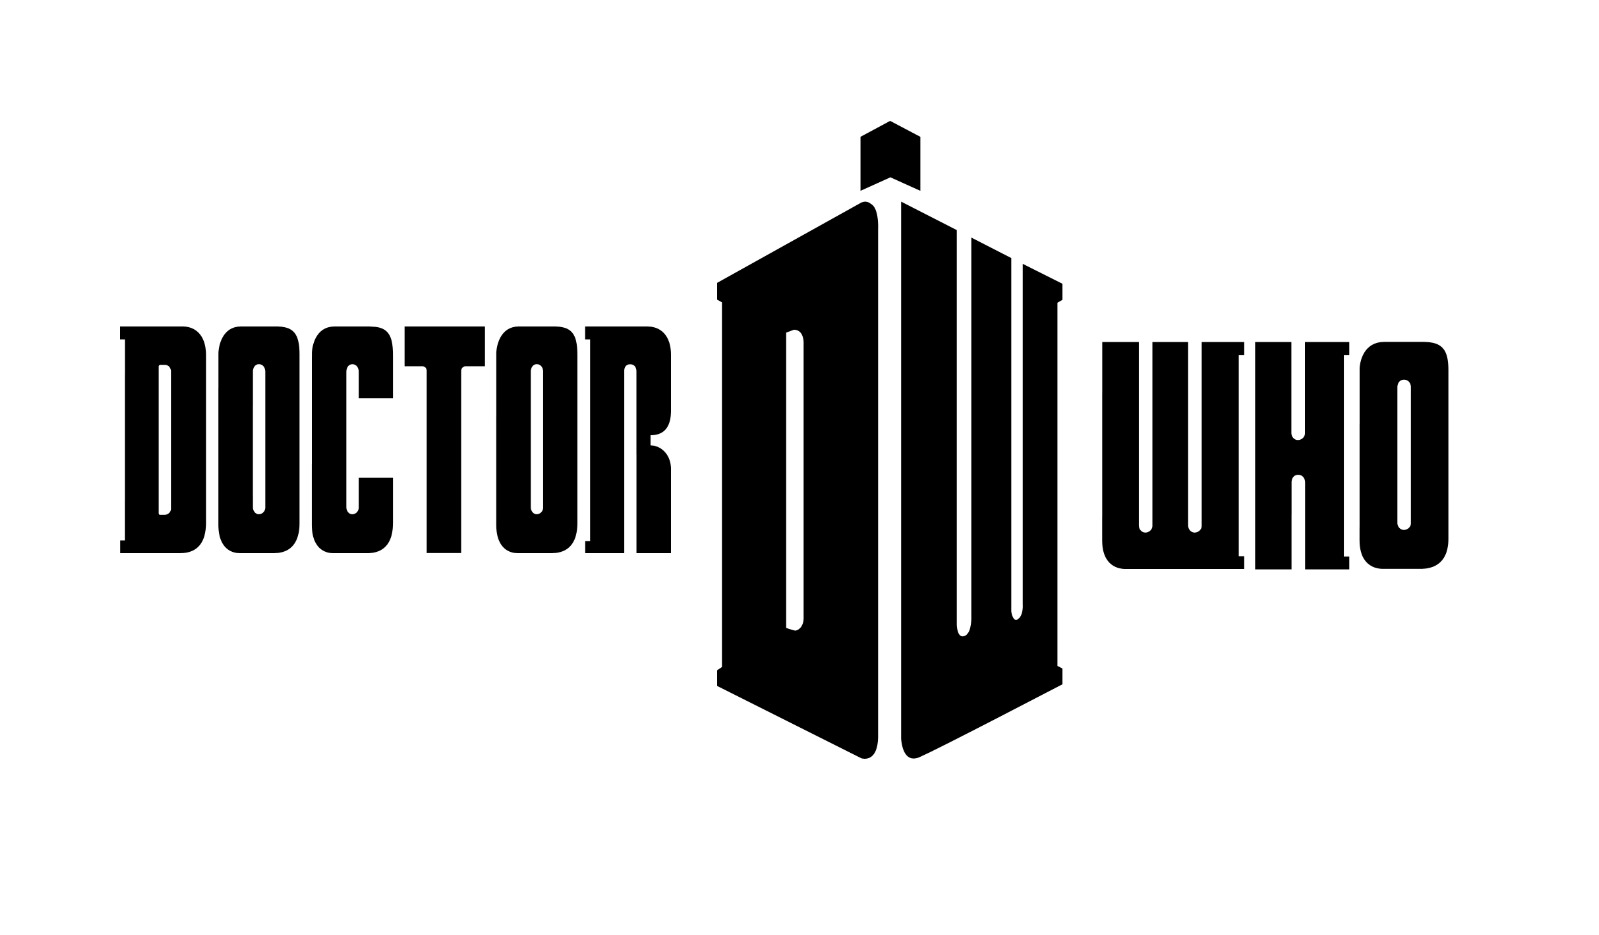 What Would The Doctor Do? - Black Vinyl Decal - Tardis, Time Lord, Doctor Who